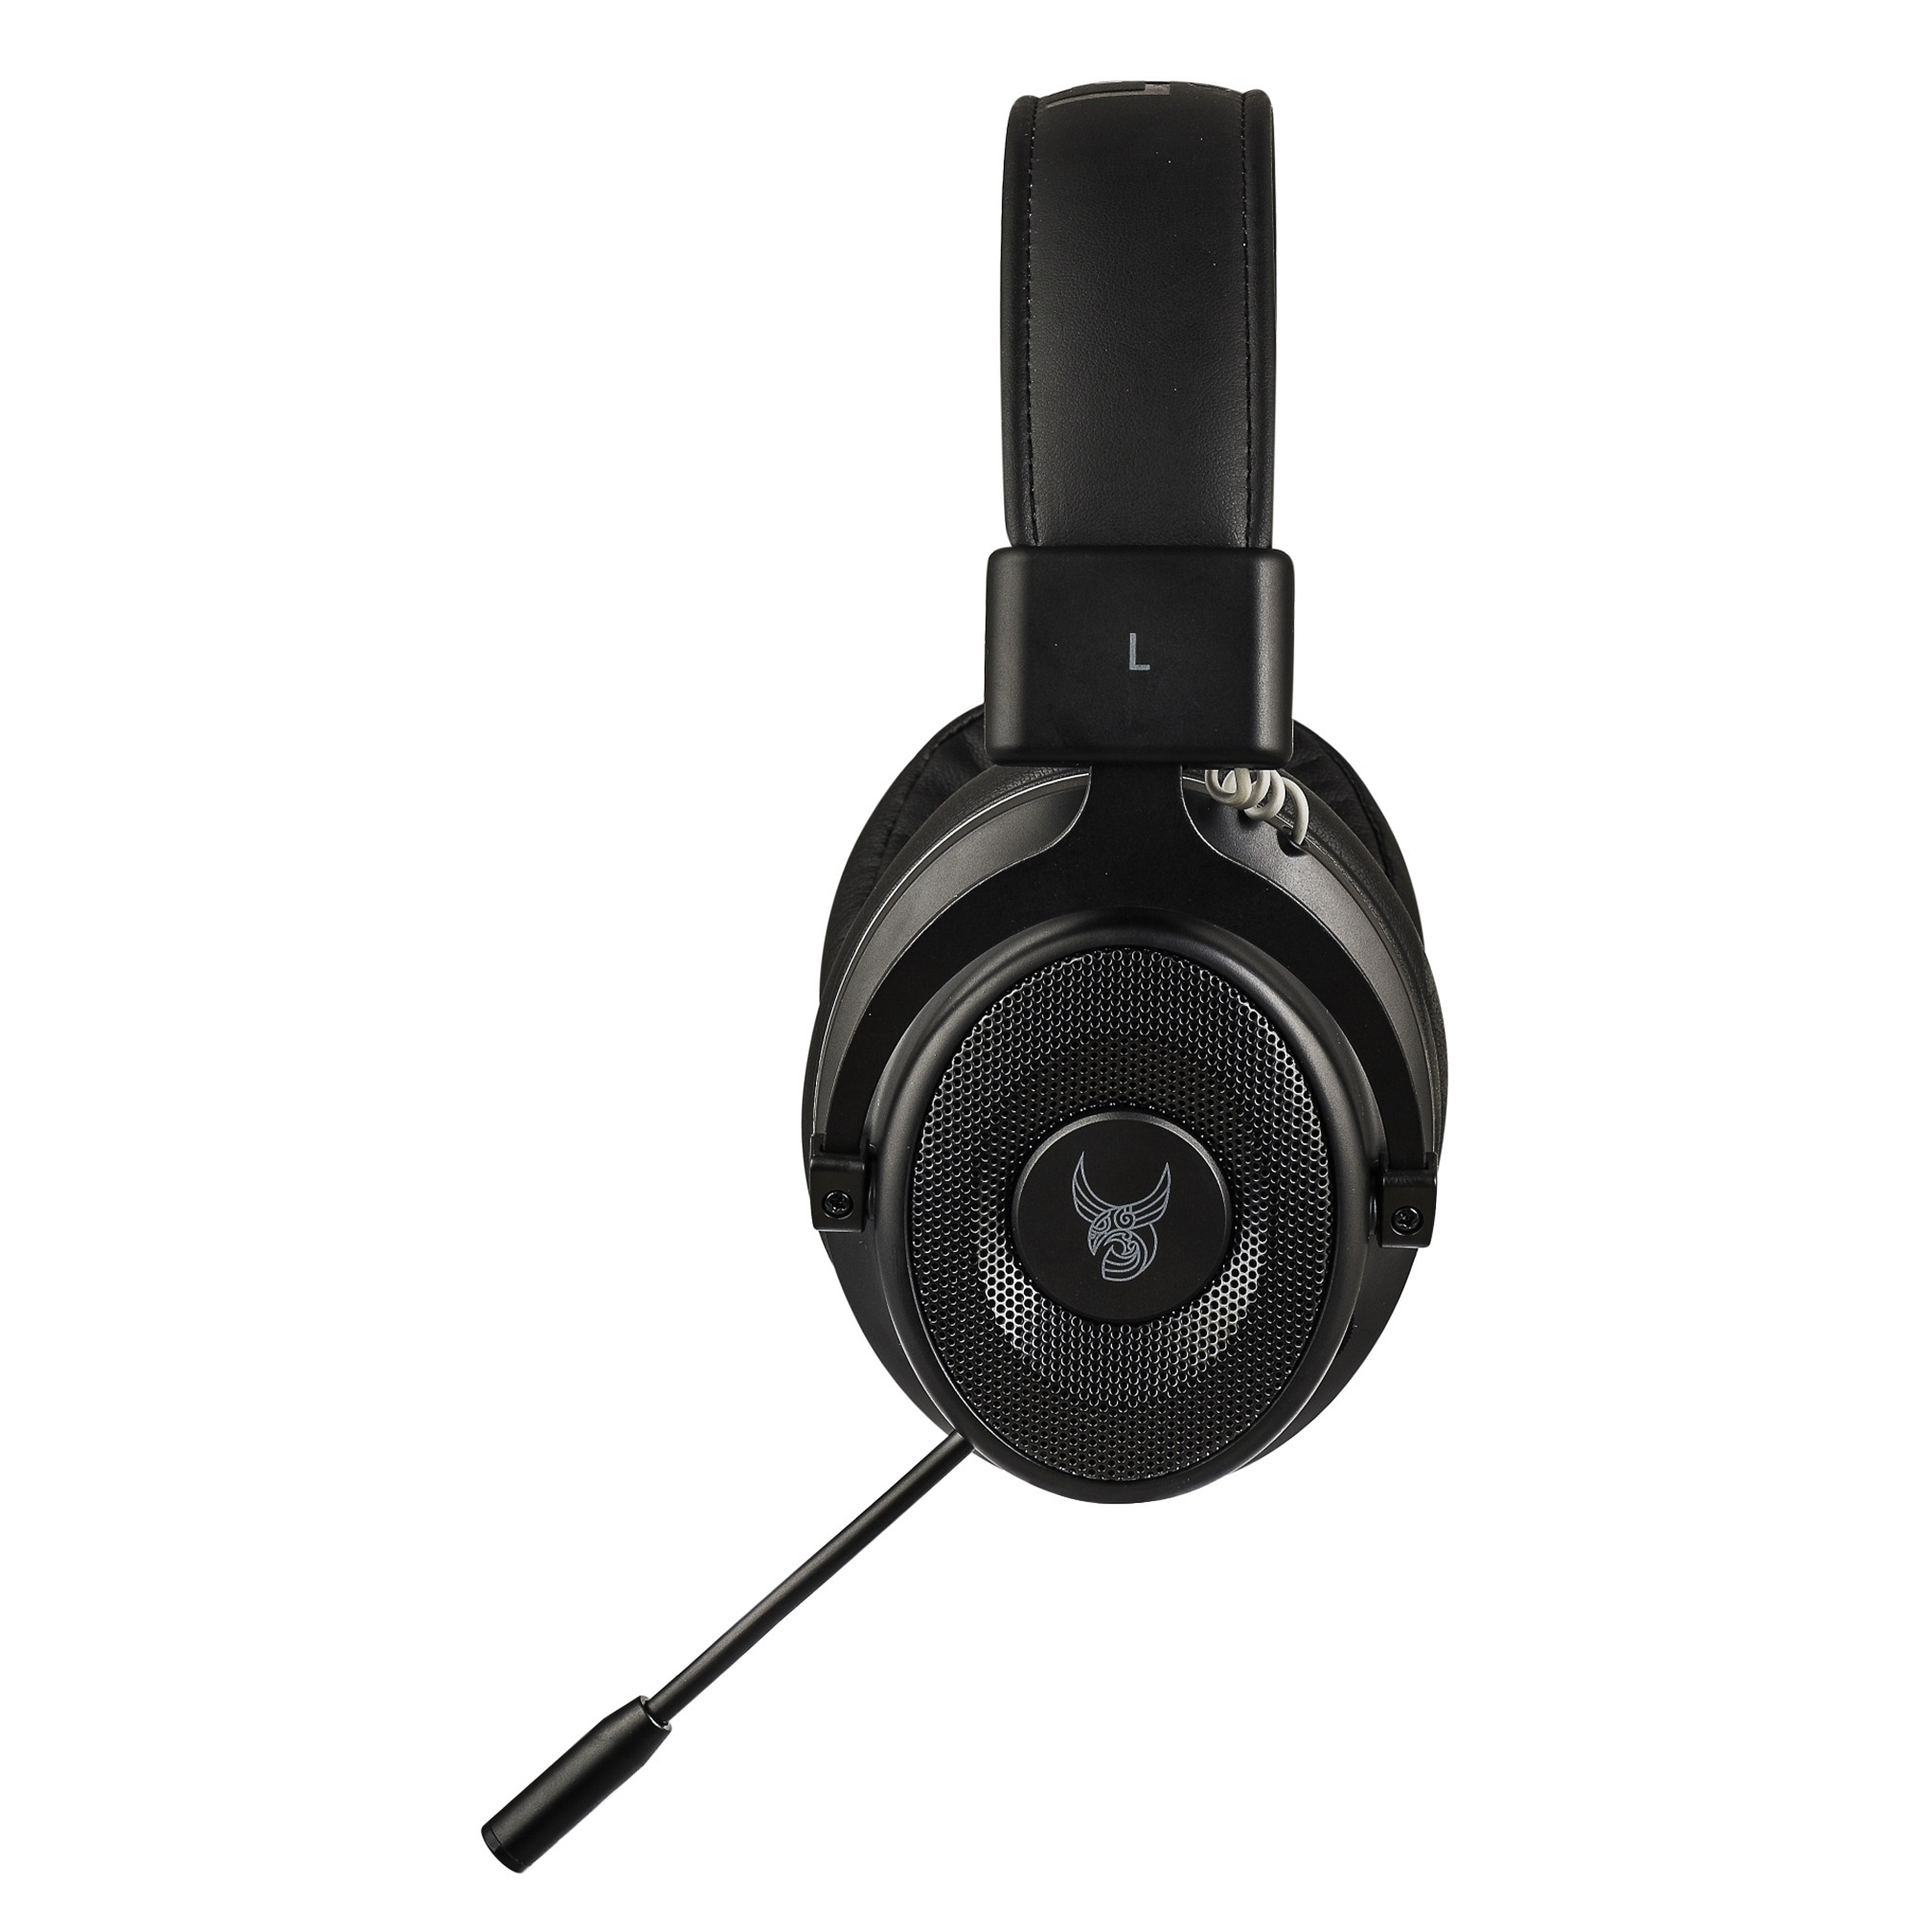 Headset Gaming Over-ear 160376, L33T cremeweiß